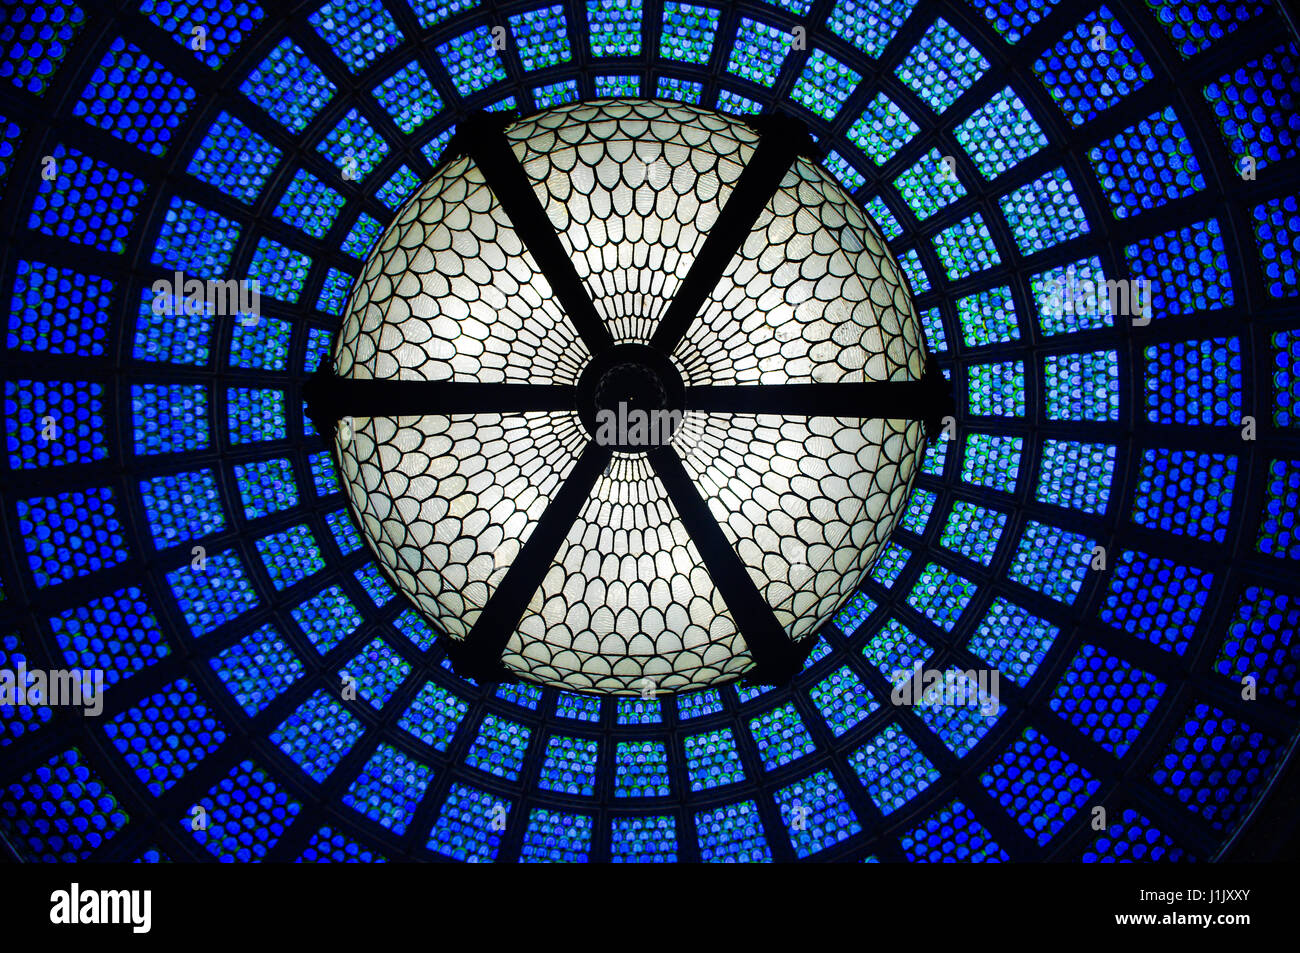 Glass dome, glass ceiling in the Cultural Center, Chicago. The intricate ceiling is made from blue stained glass. Pattern is circular and ornate. Stock Photo